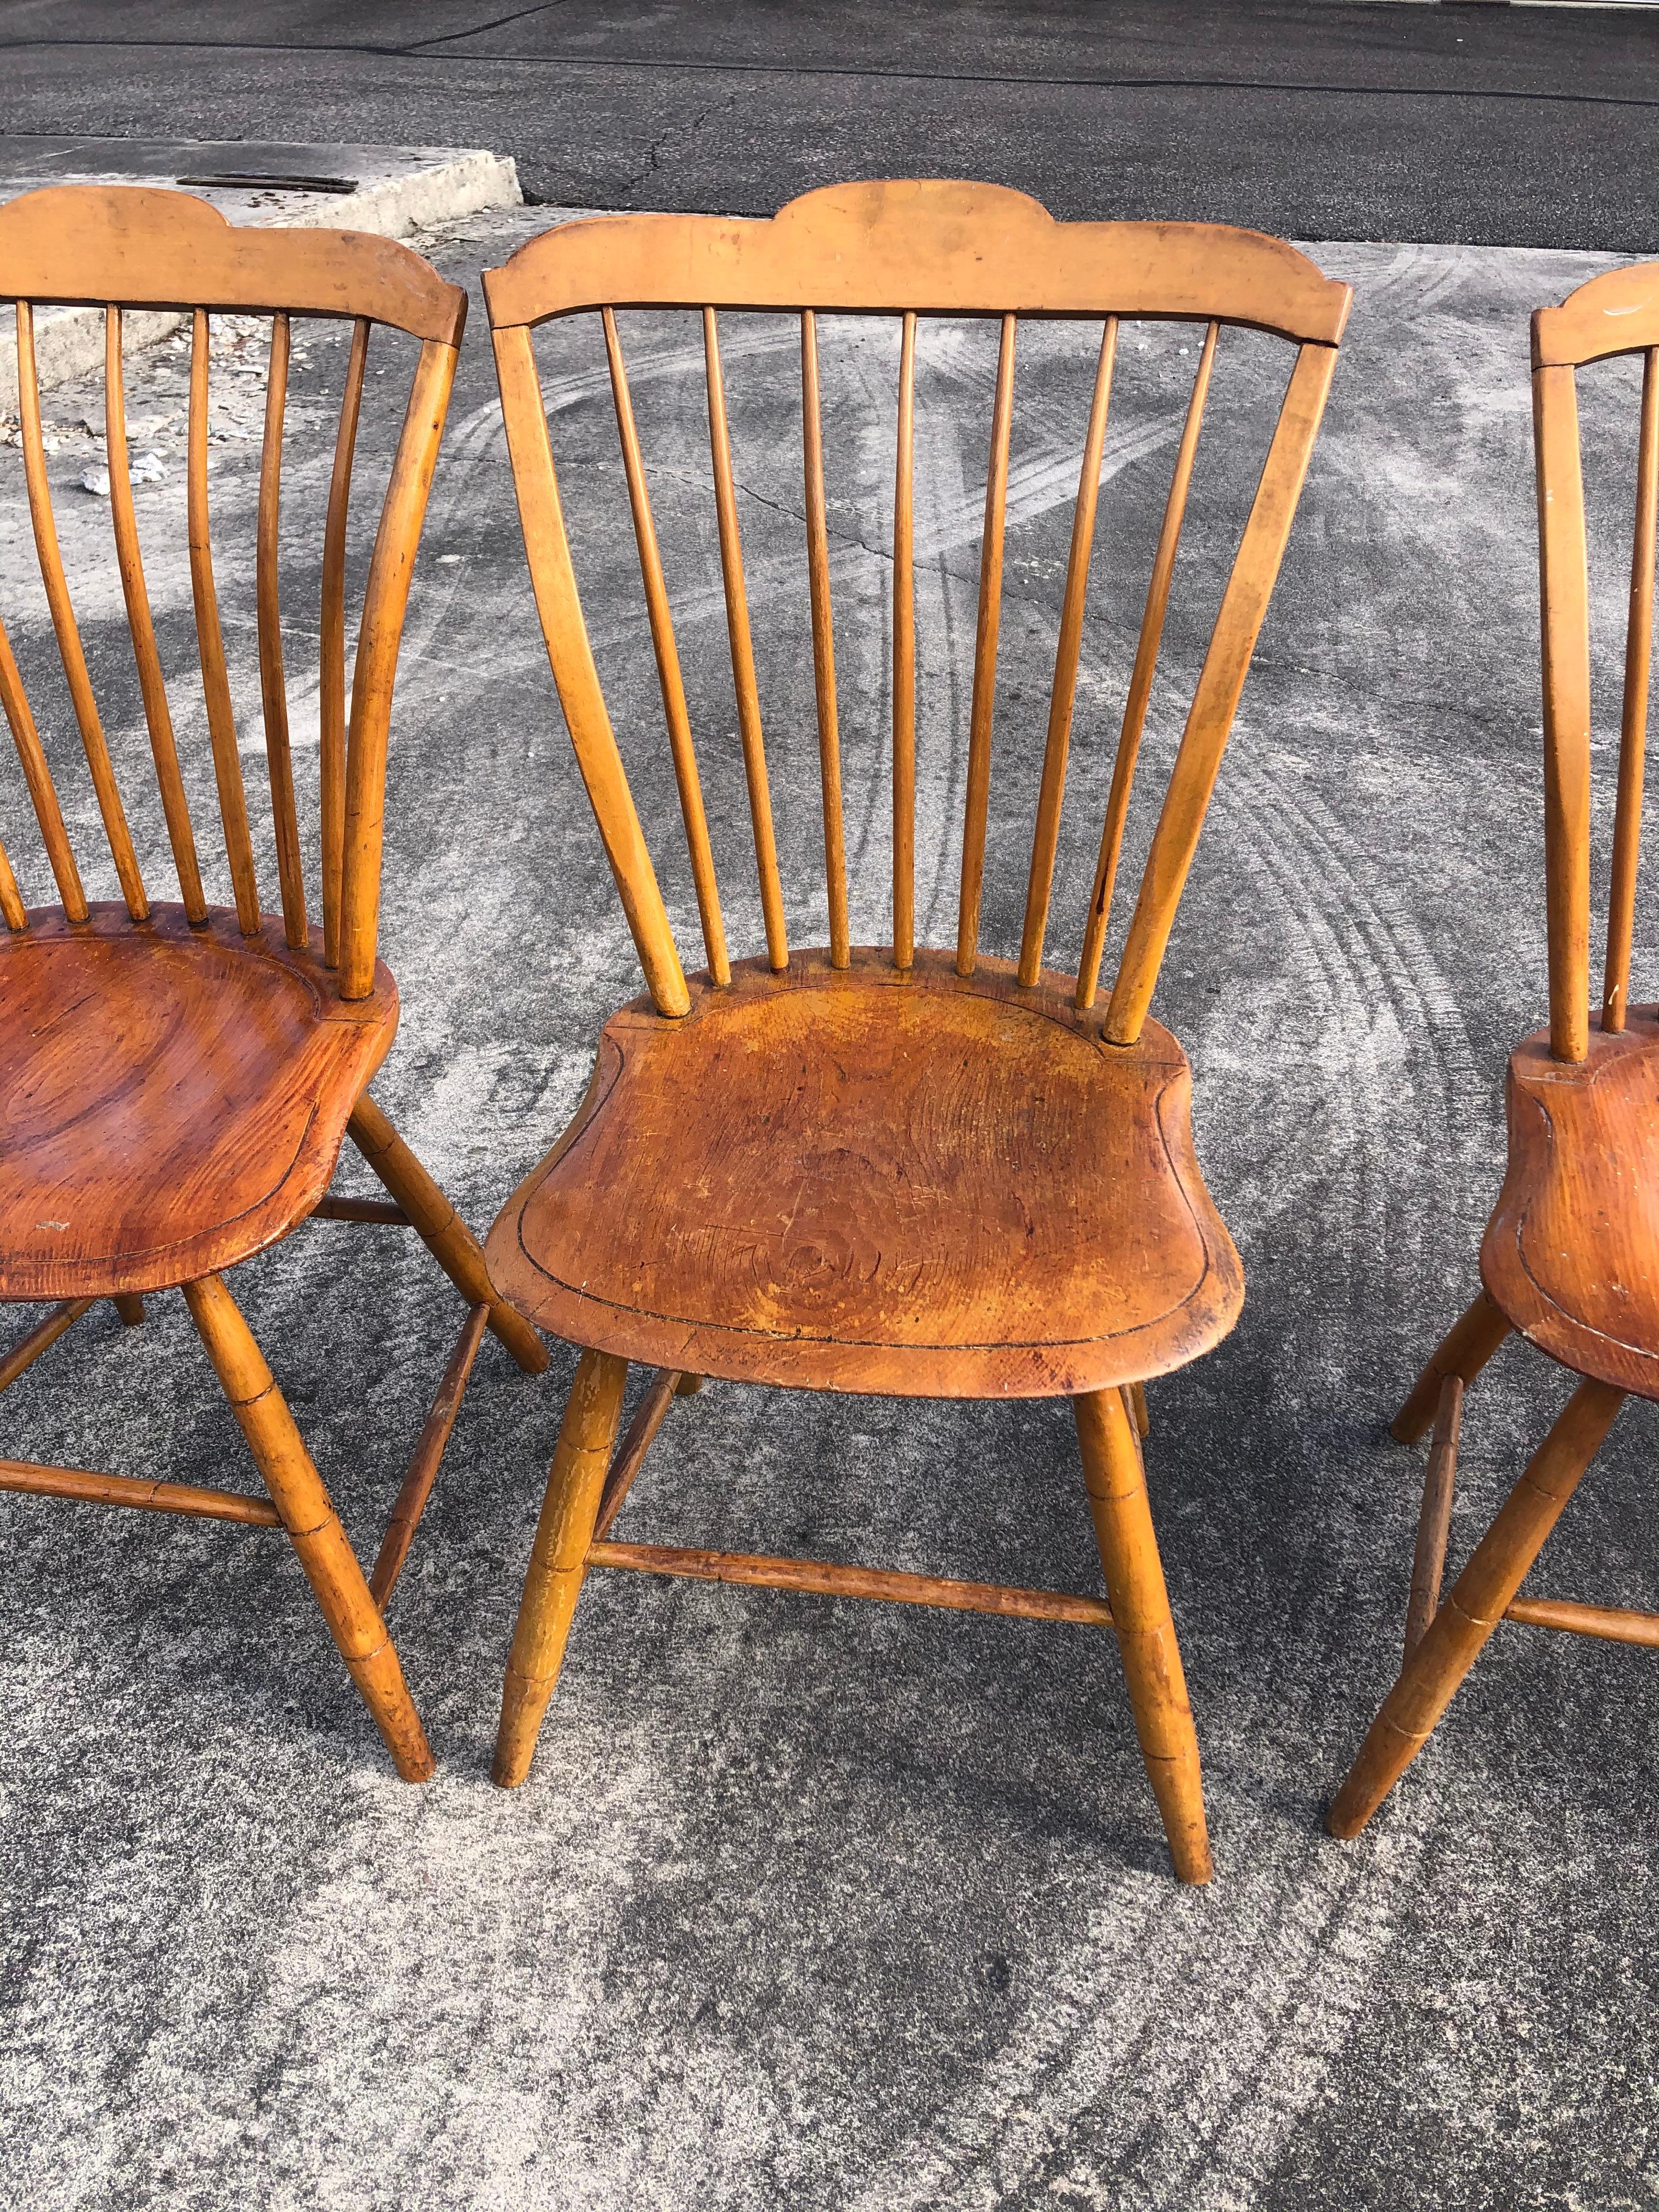 A charming country pine set of 6 spindle back dining chairs having scalloped tops, beautifully shaped comfortable seats, and weathered character. One of the chairs has a circular hole that's been filled in with wood, and was obviously once the